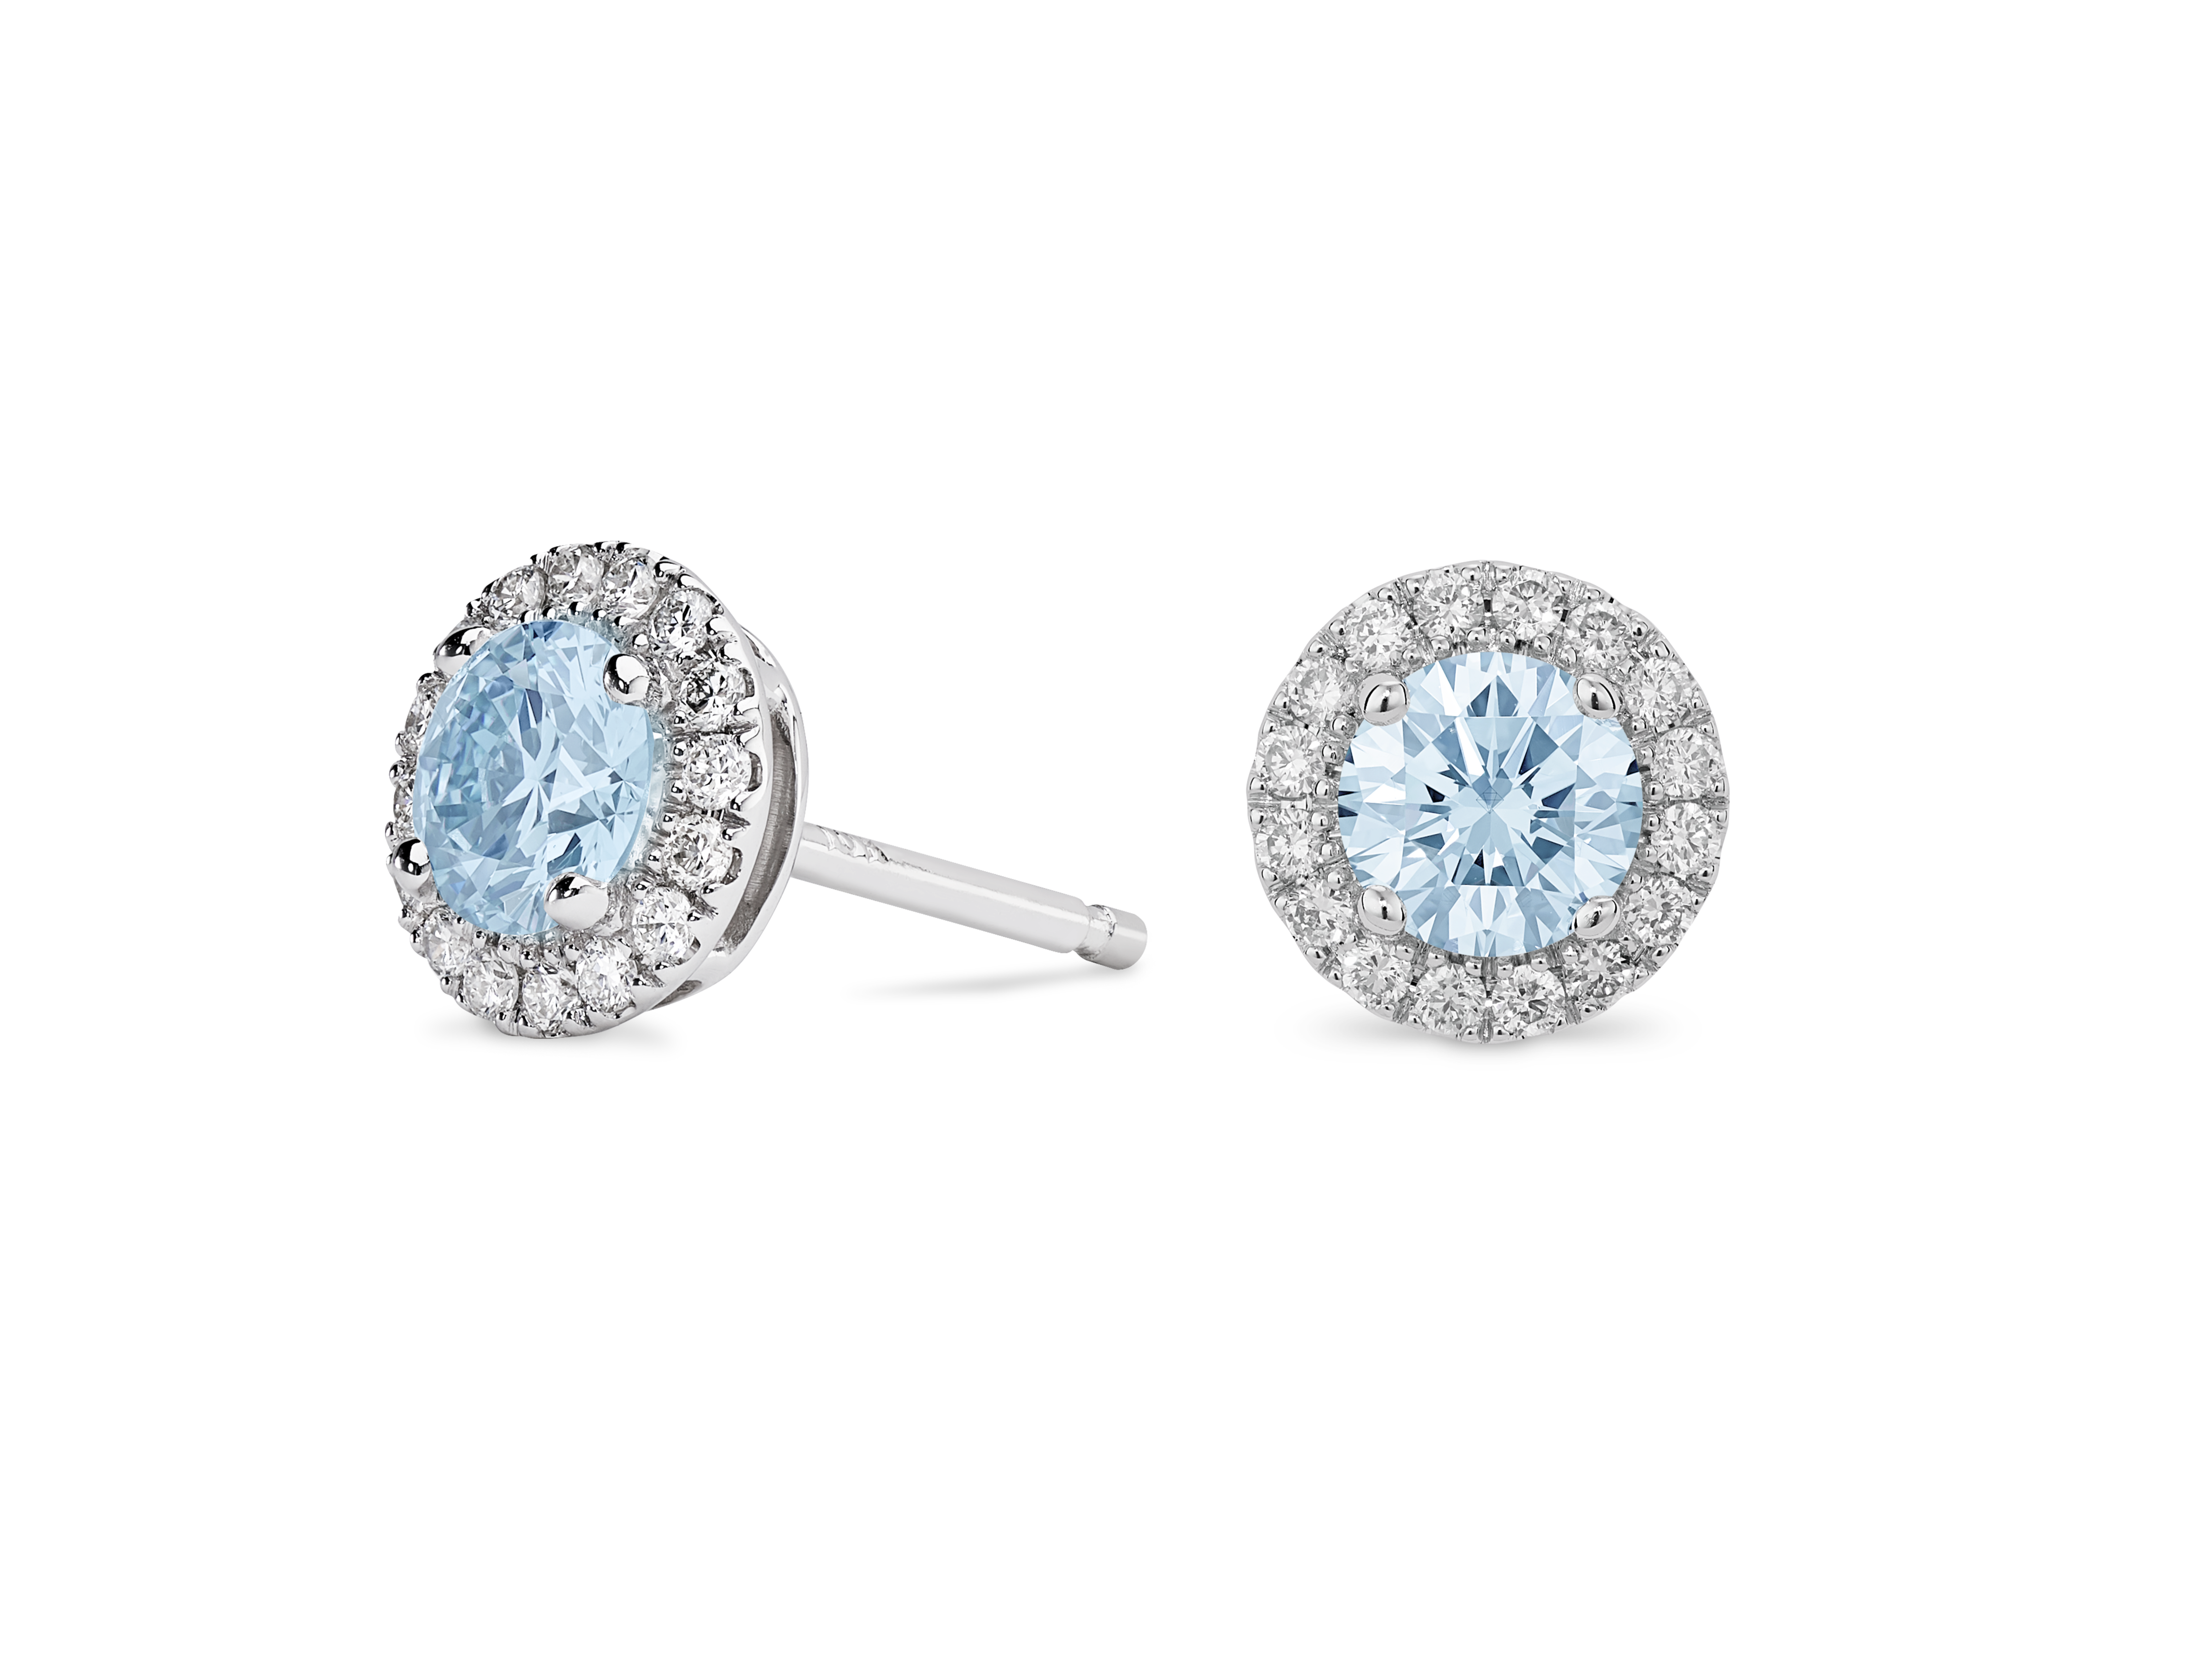 Side view of 1 carat total weight 14k white gold halo studs with blue diamonds